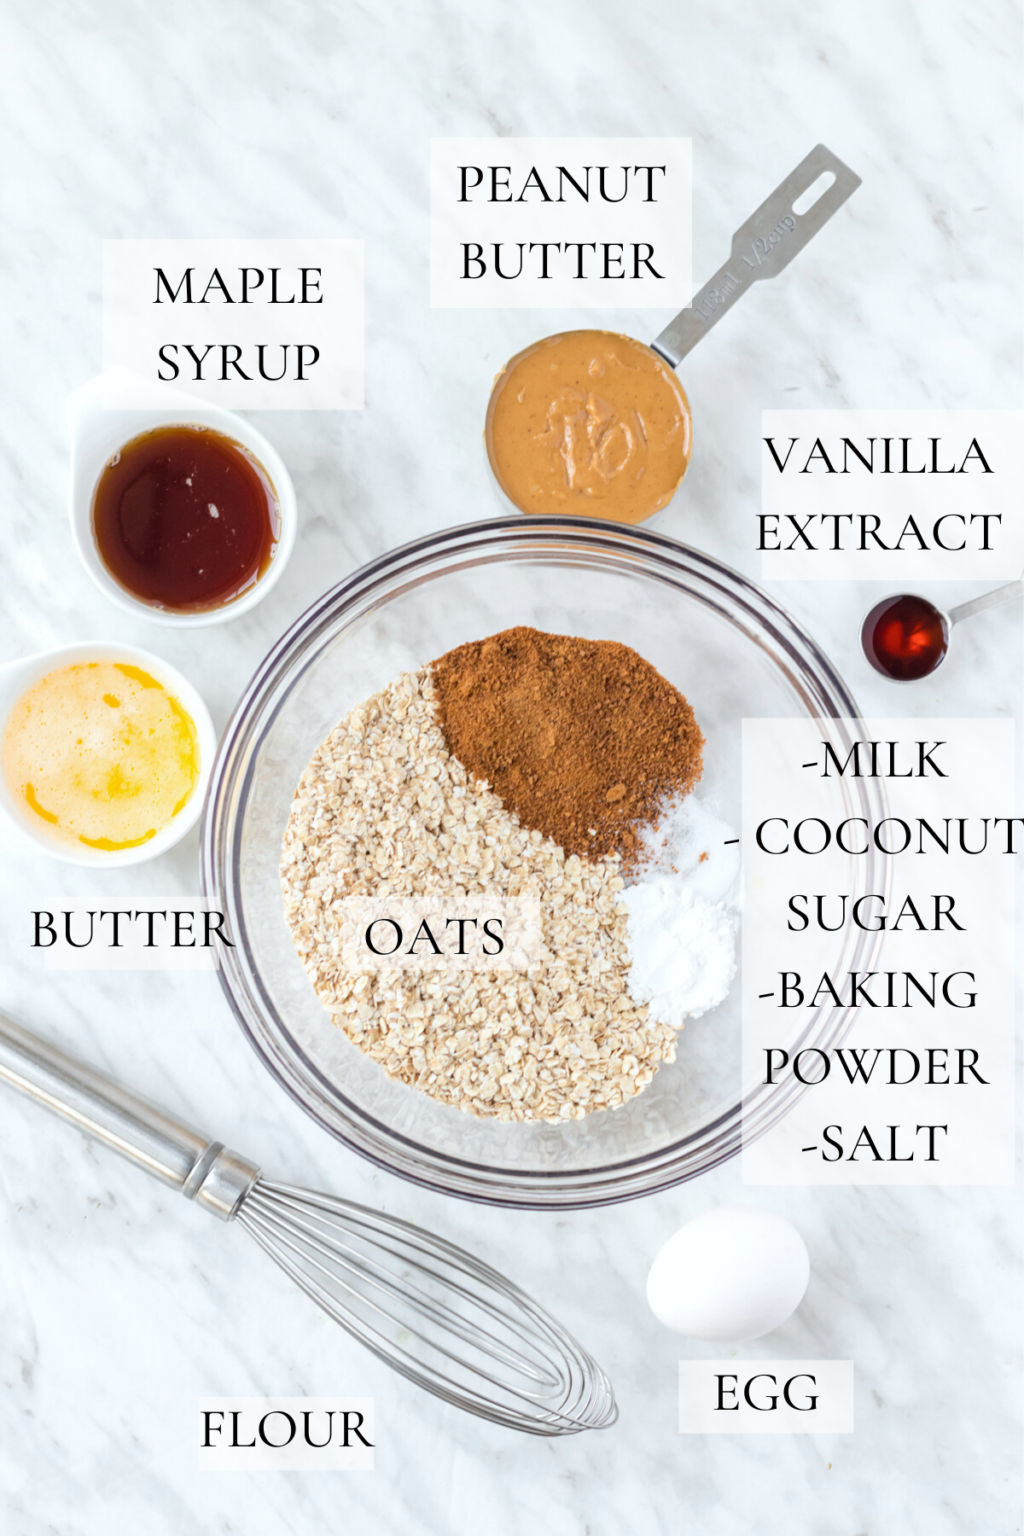 Healthy Baked Oatmeal with Peanut Butter - All You Need is Brunch